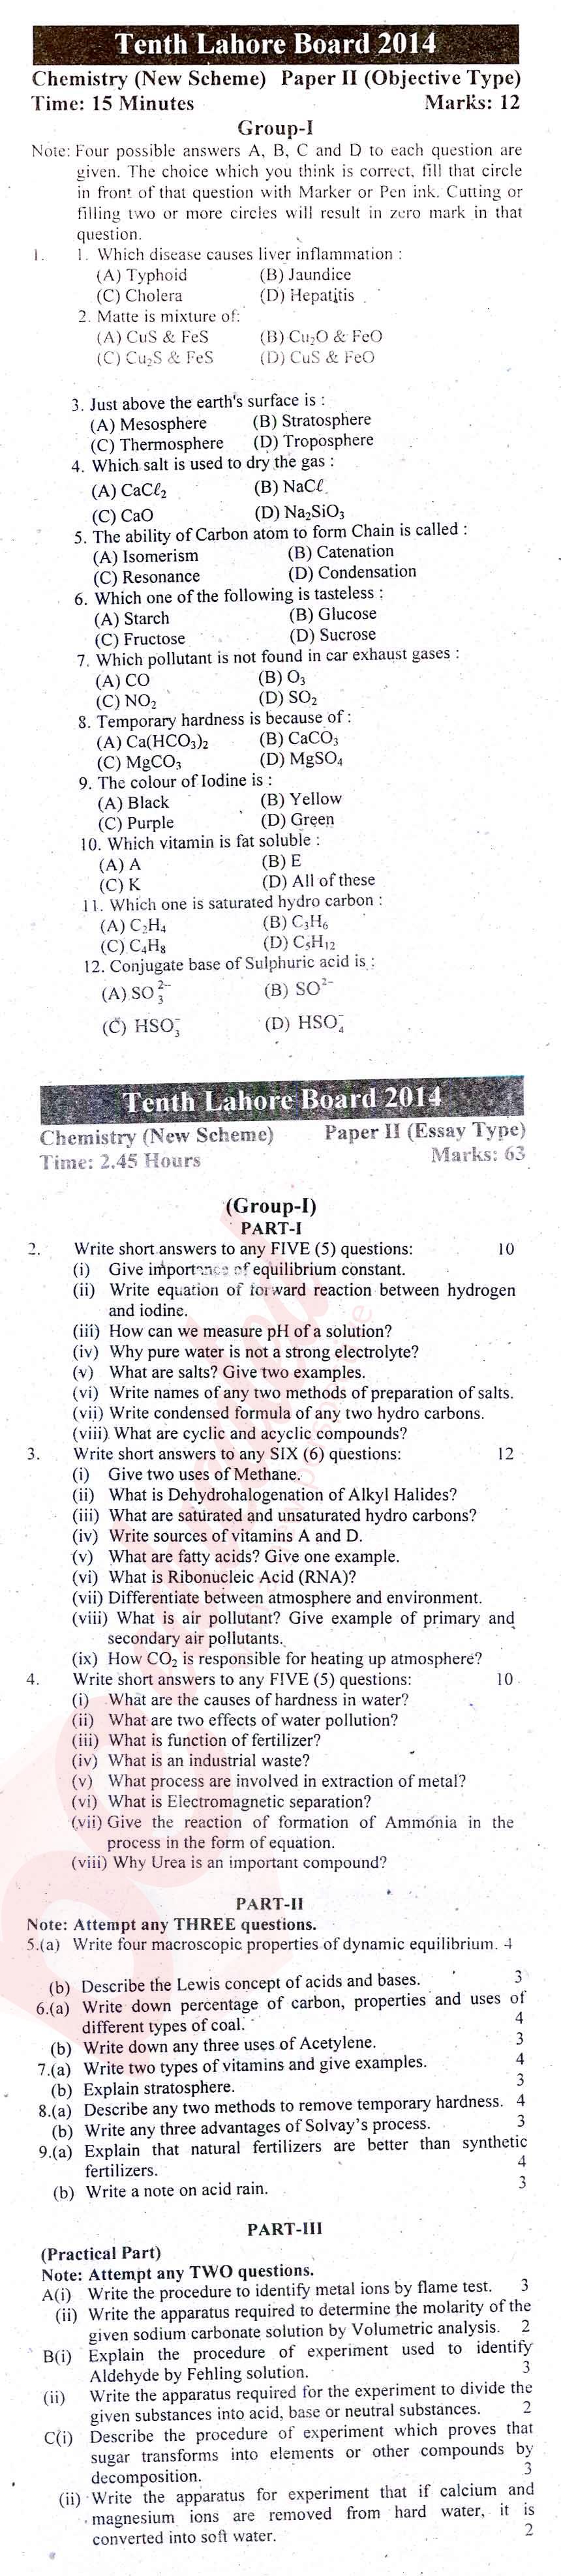 Chemistry 10th English Medium Past Paper Group 1 BISE Lahore 2014